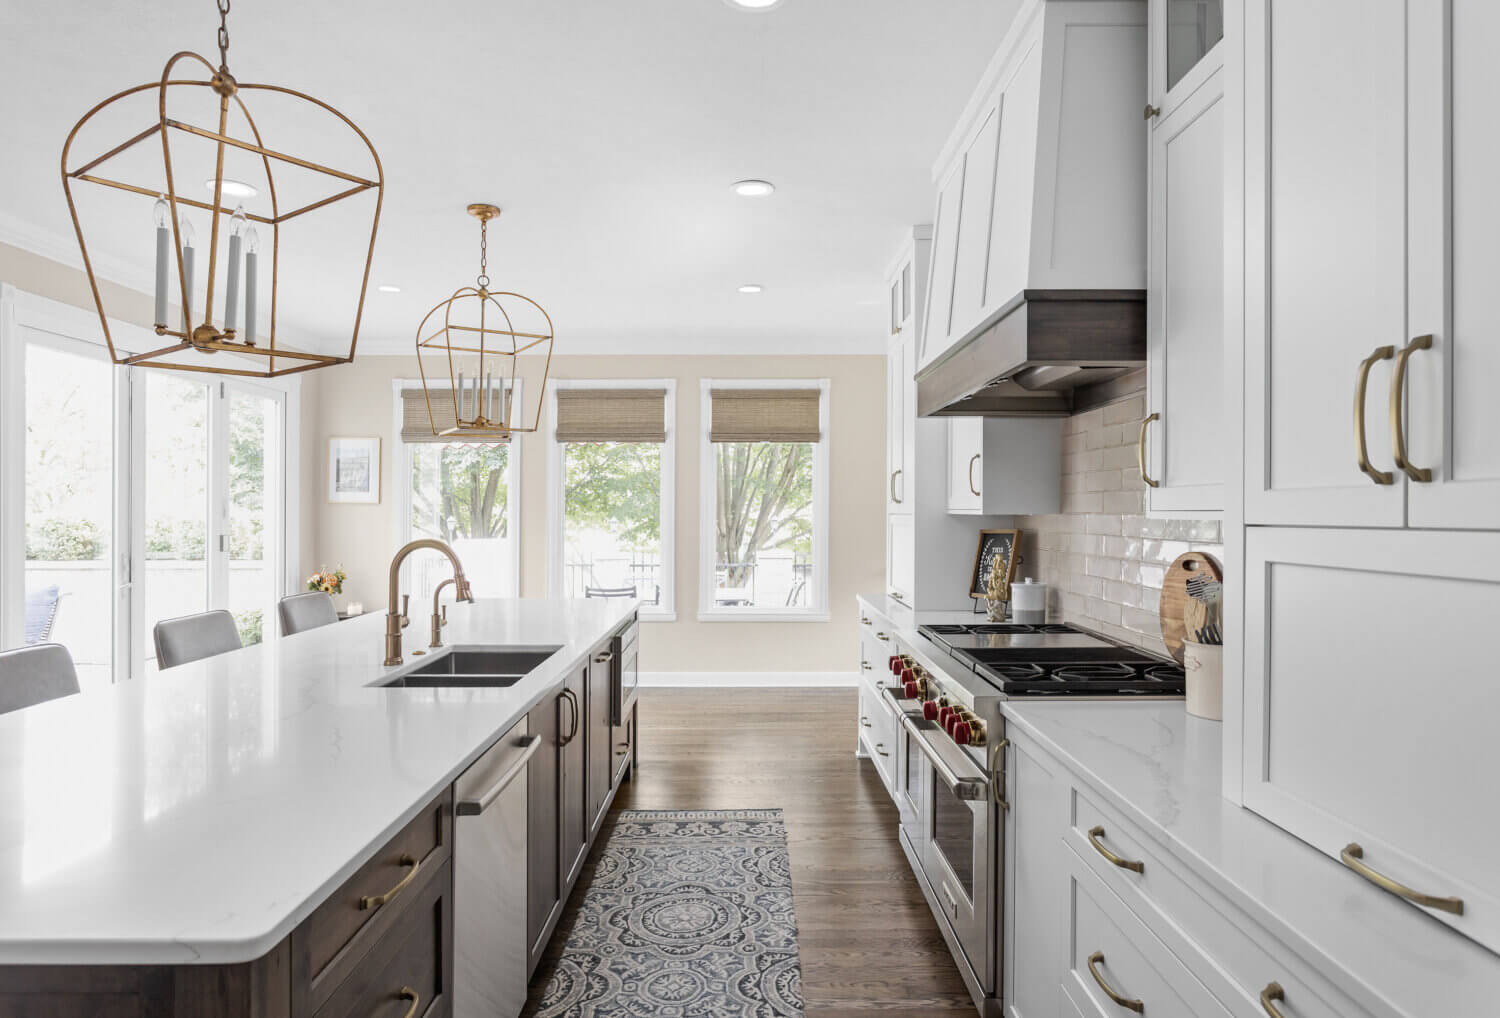 A two-tone kitchen design with white and dark stained knotty alder cabinets. A modern wood hood is painted white with a knotty alder stained freeze that matches the kitchen island.